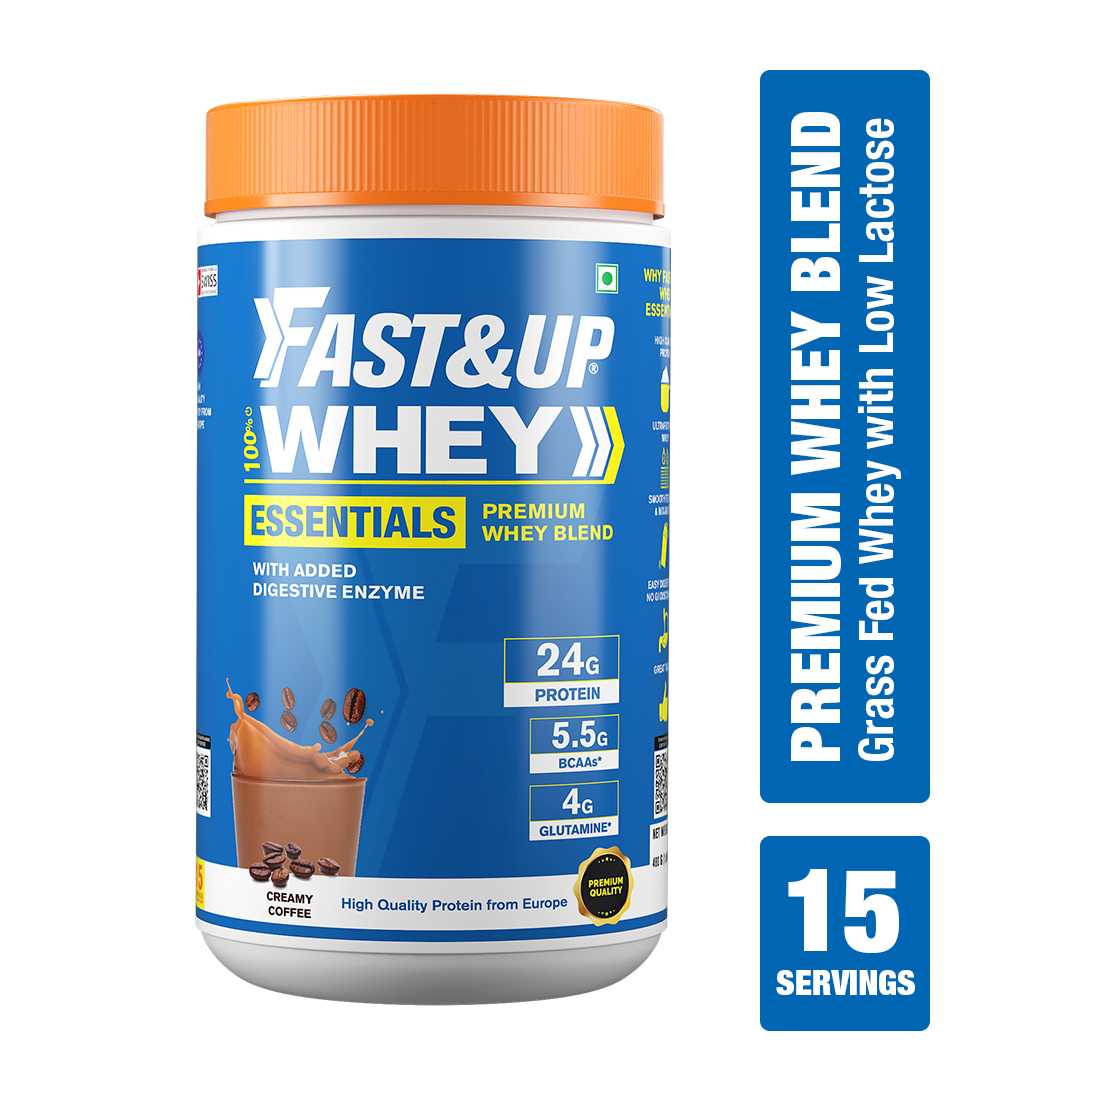 Fast&Up Whey Essentials 1.058 Lb Creamy Coffee Flavour, Grass Fed Whey Powder From Europe, 24g Clean